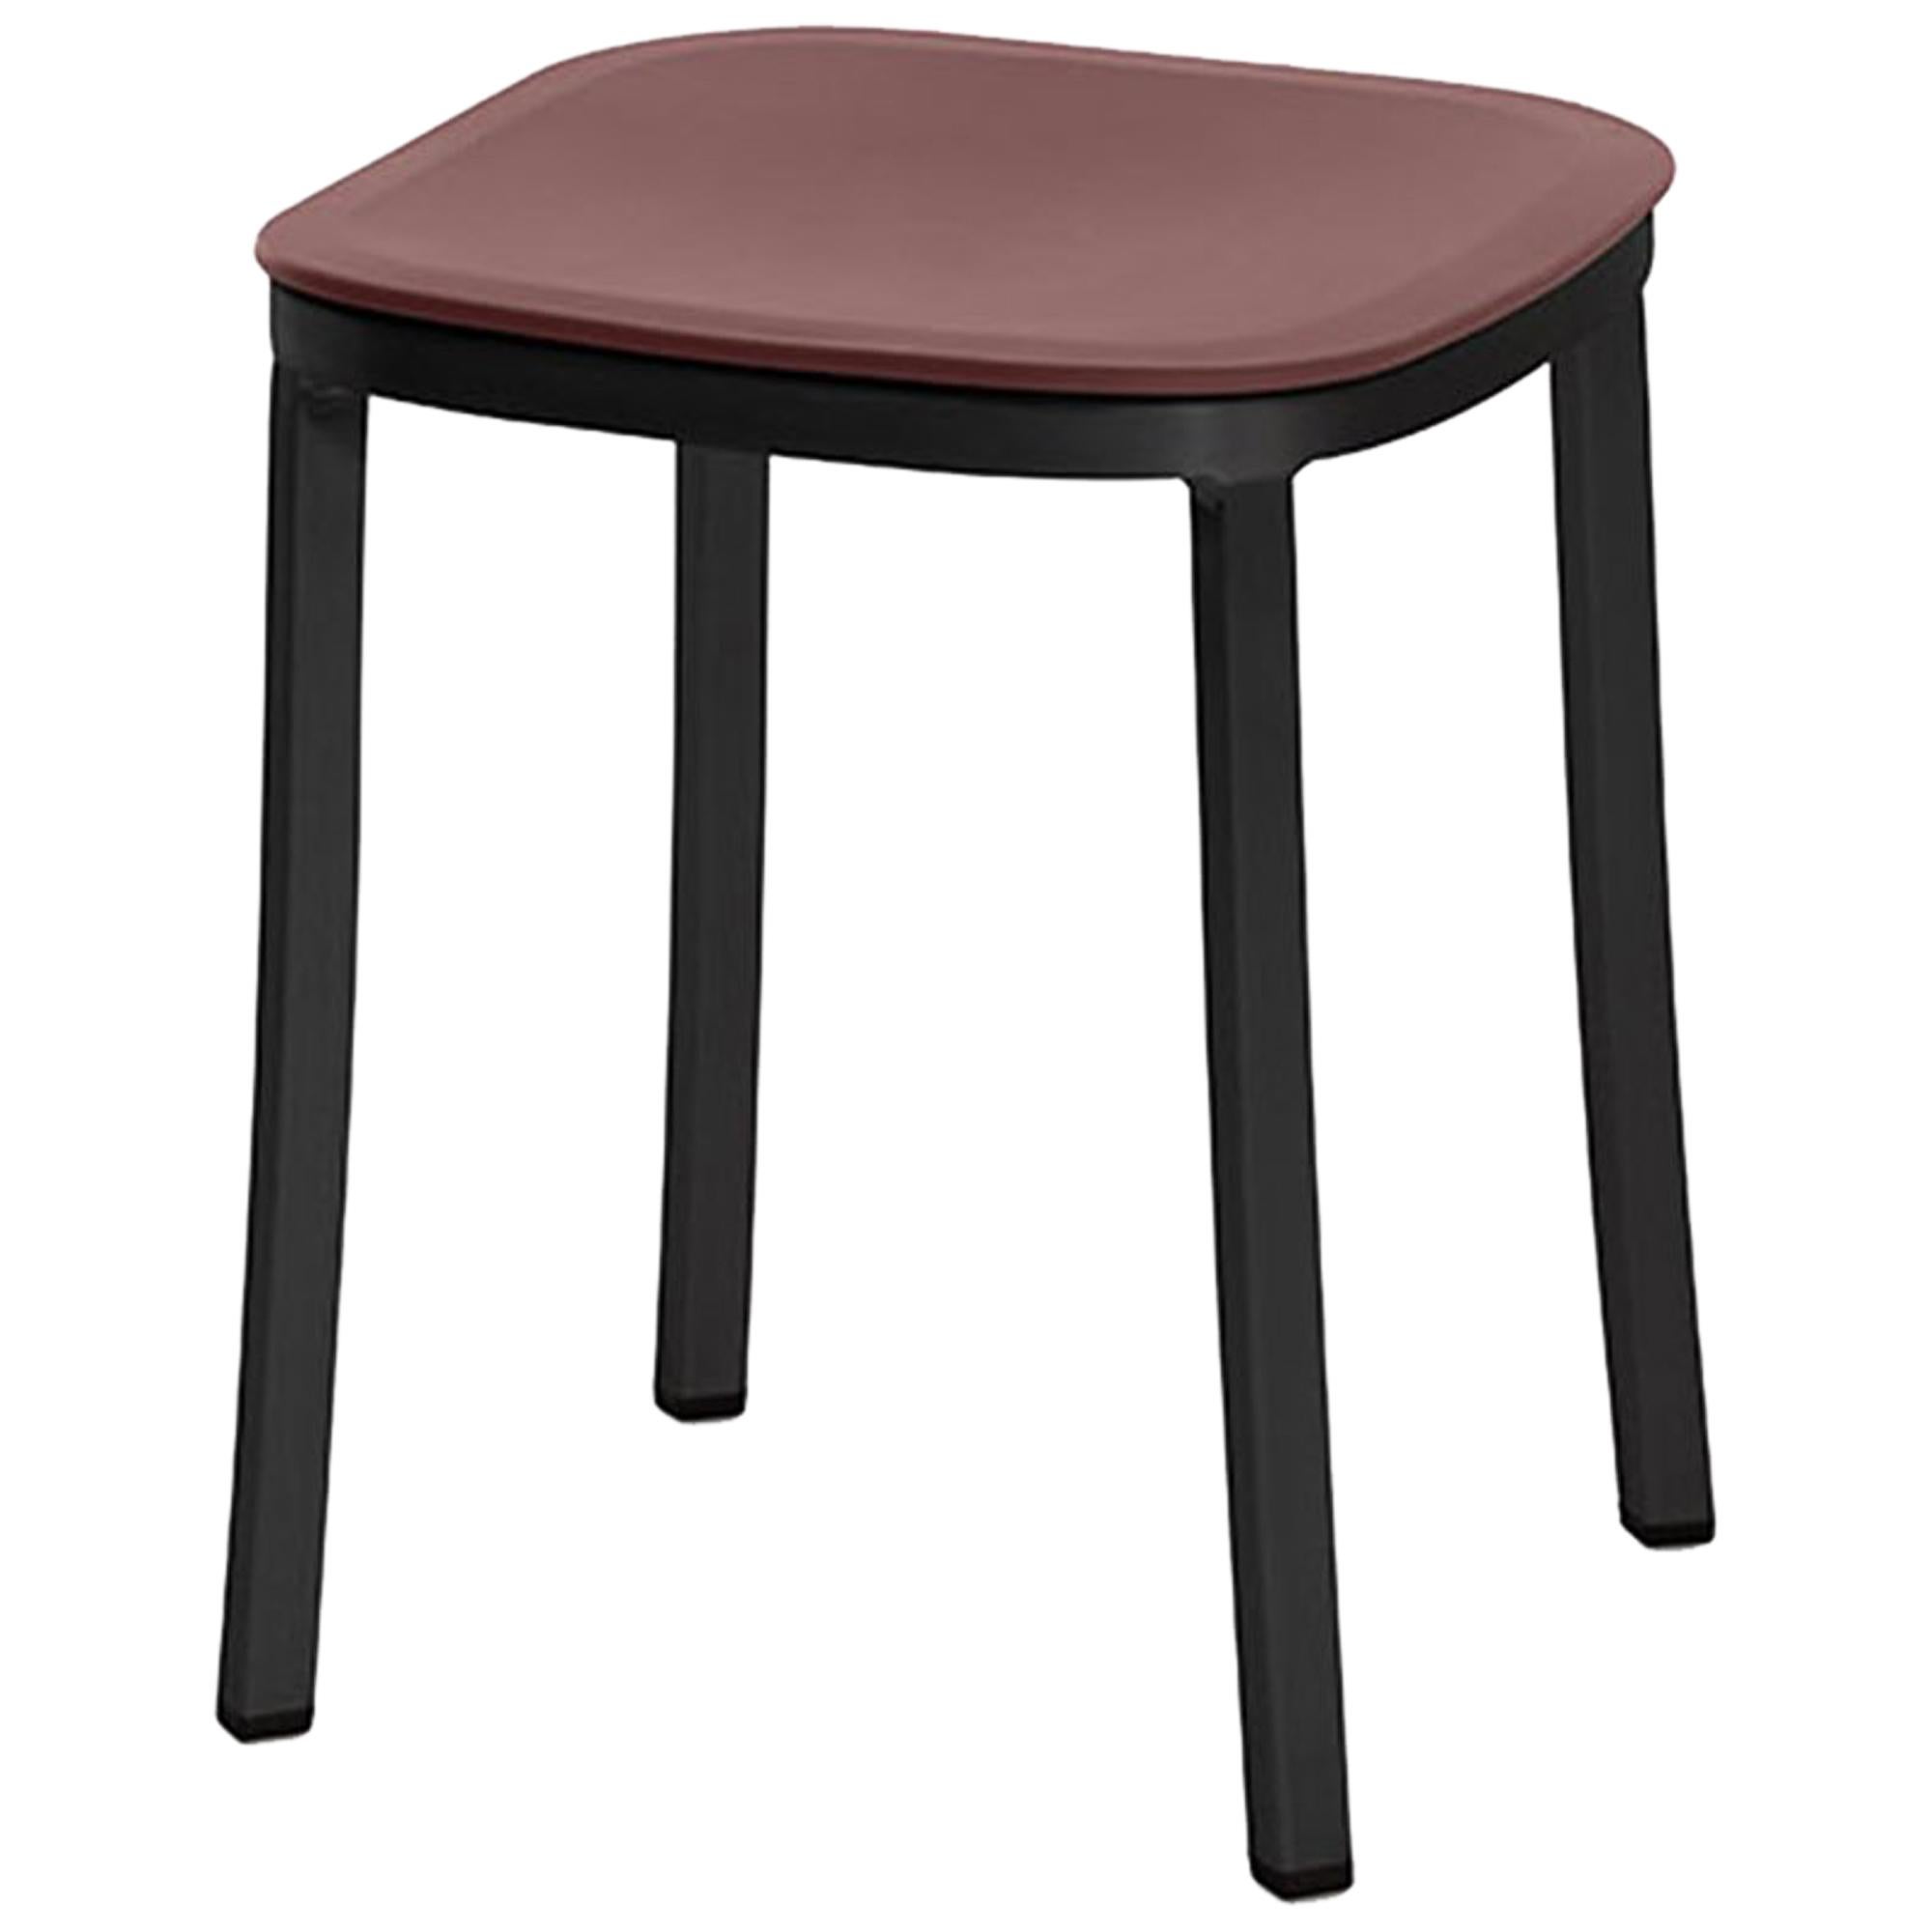 Emeco 1 Inch Small Stool in Dark Aluminum and Bordeaux by Jasper Morrison